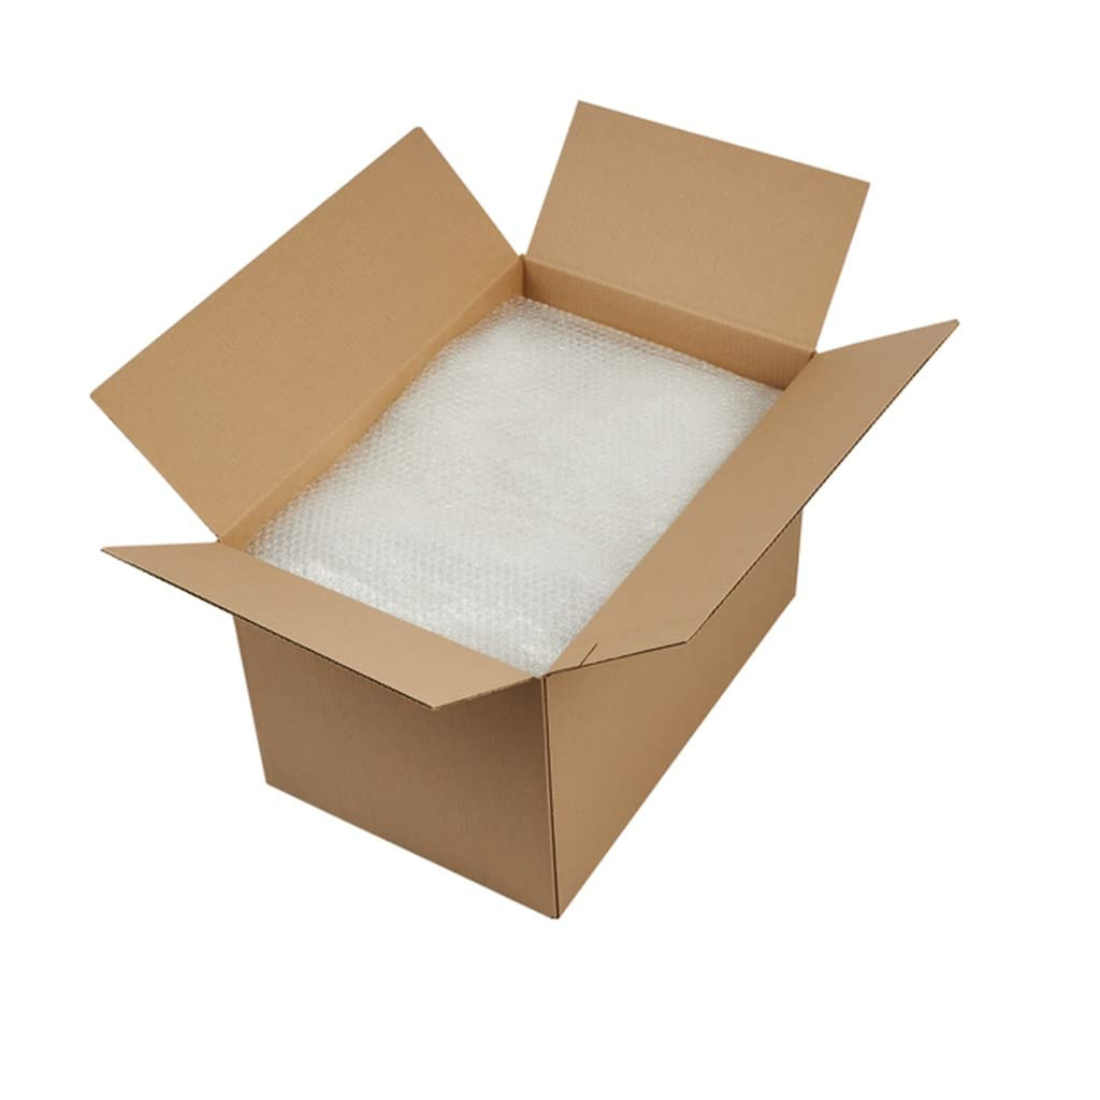 3 Ply Brown Corrugated Box for Packing (13.25X7.5X6 inches) - Pack of 20 Boxes